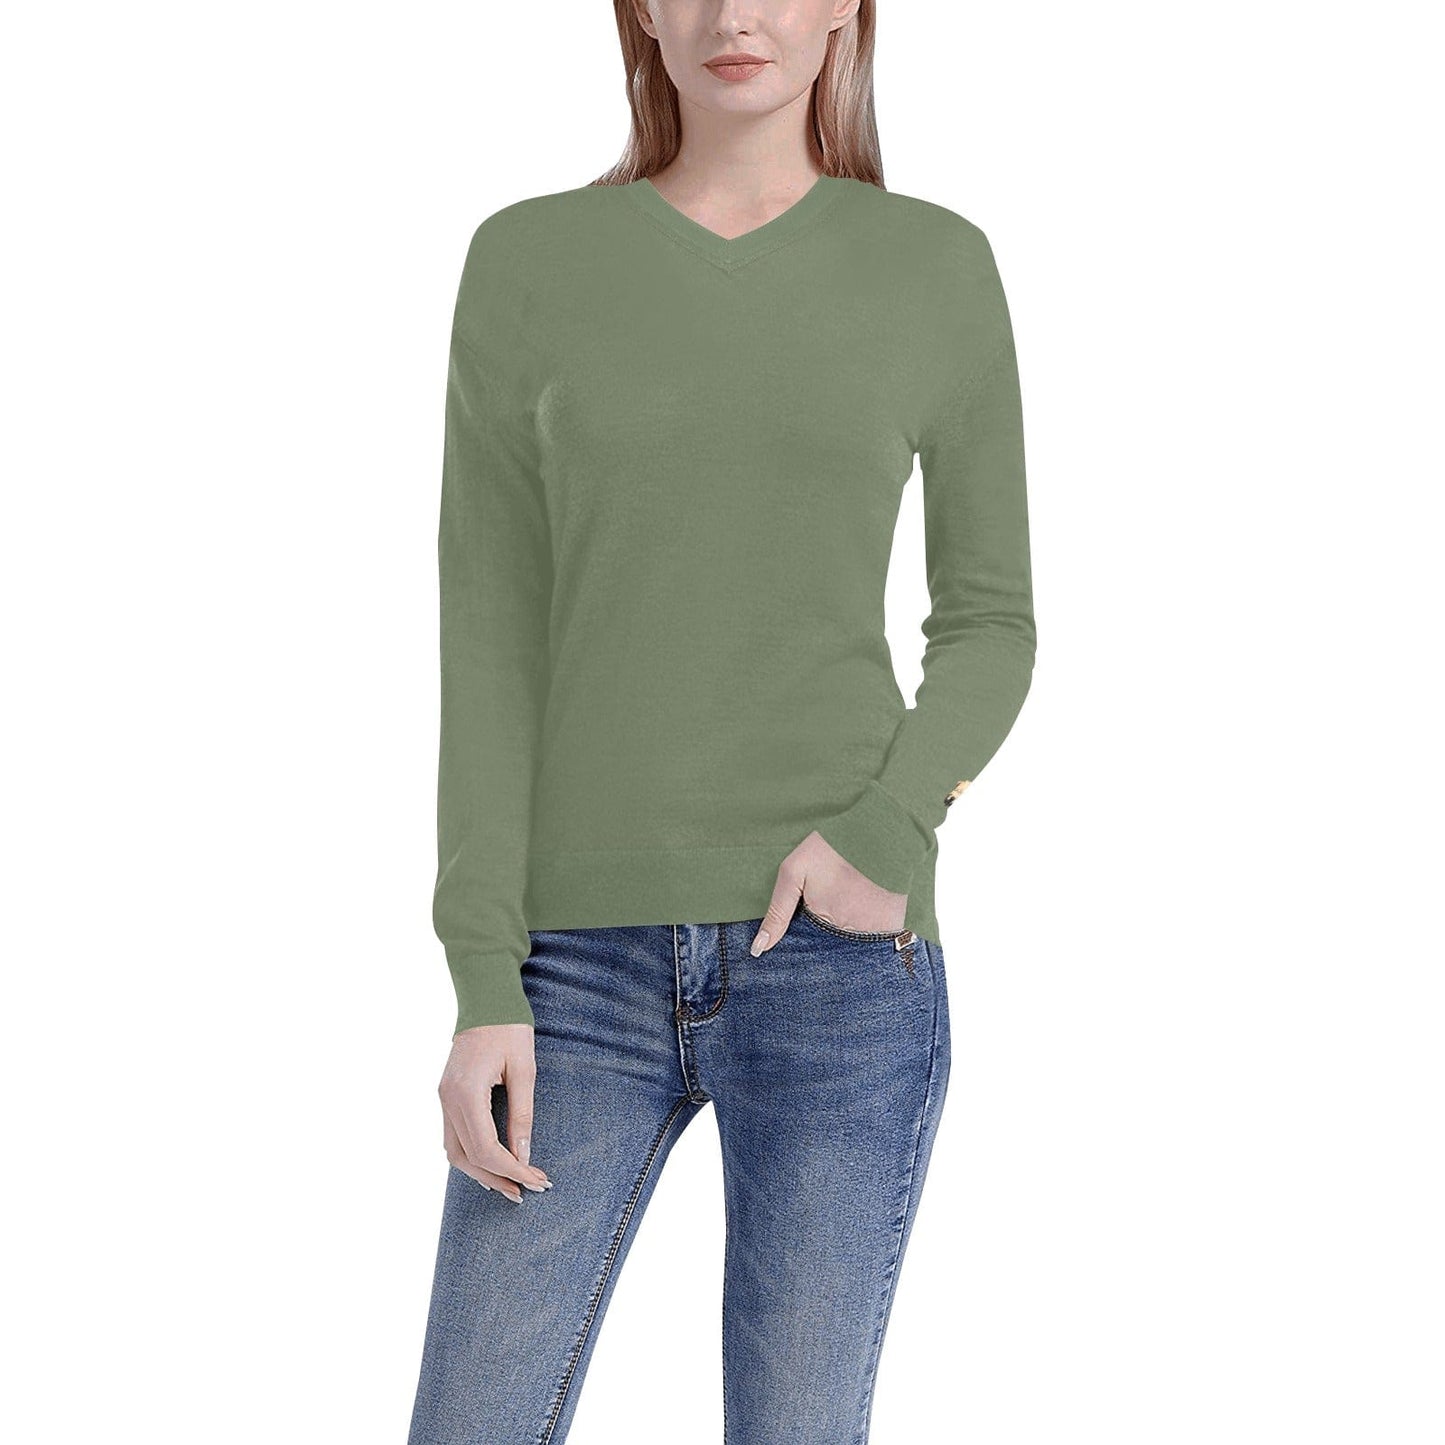 the wheaten store Long Sleeved Shirt 12 colors